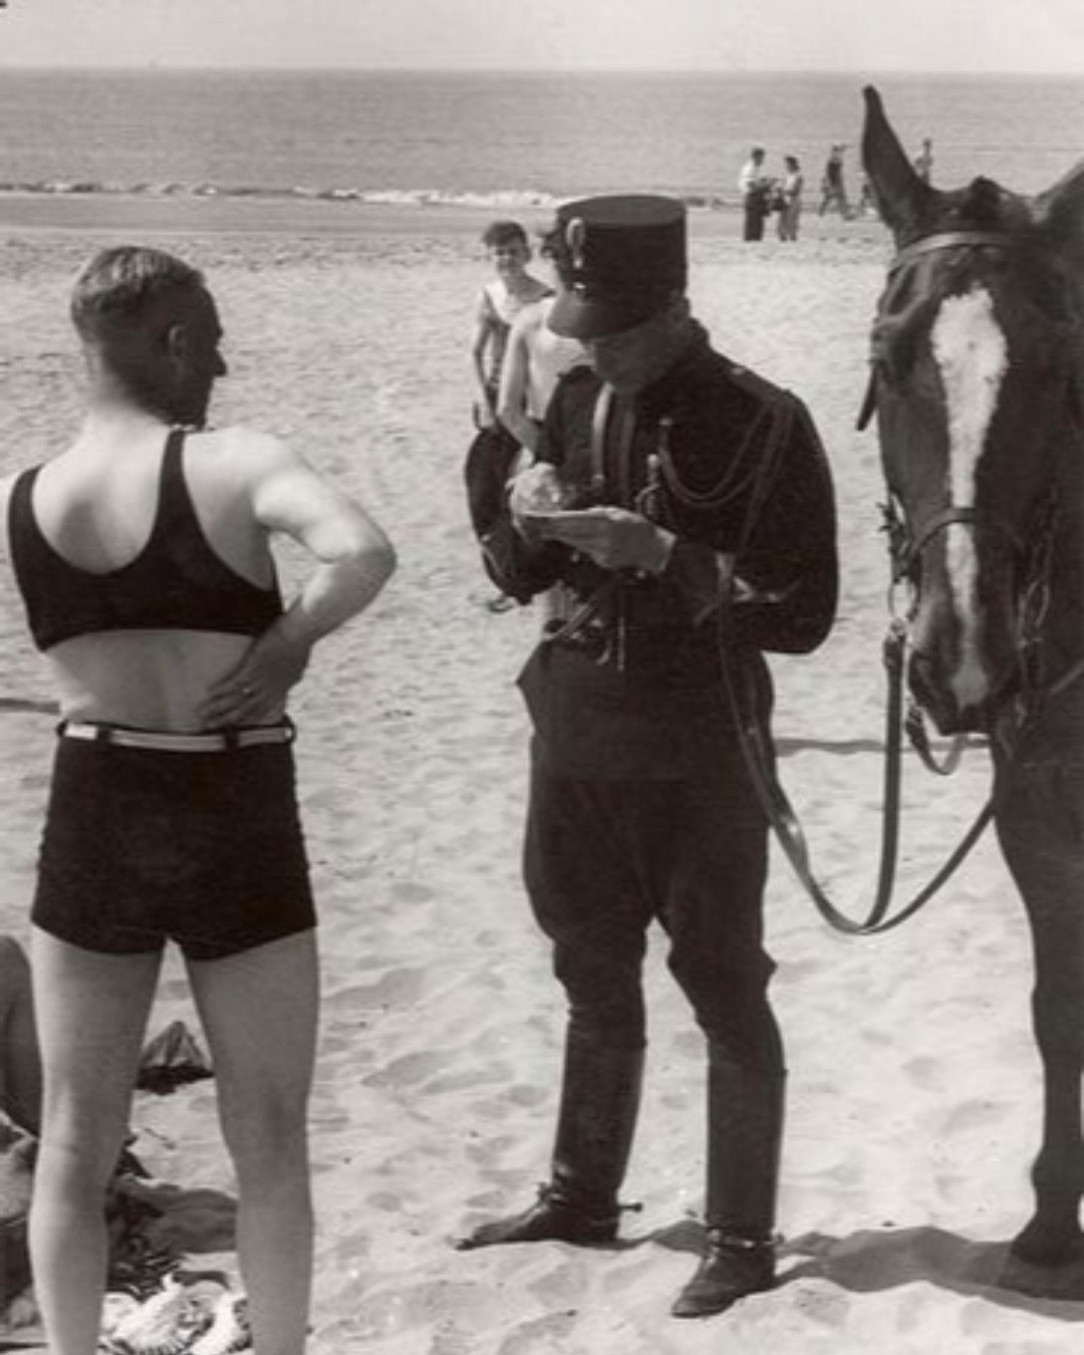 1931, Netherlands. A man is being fined for wearing indecent swimwear